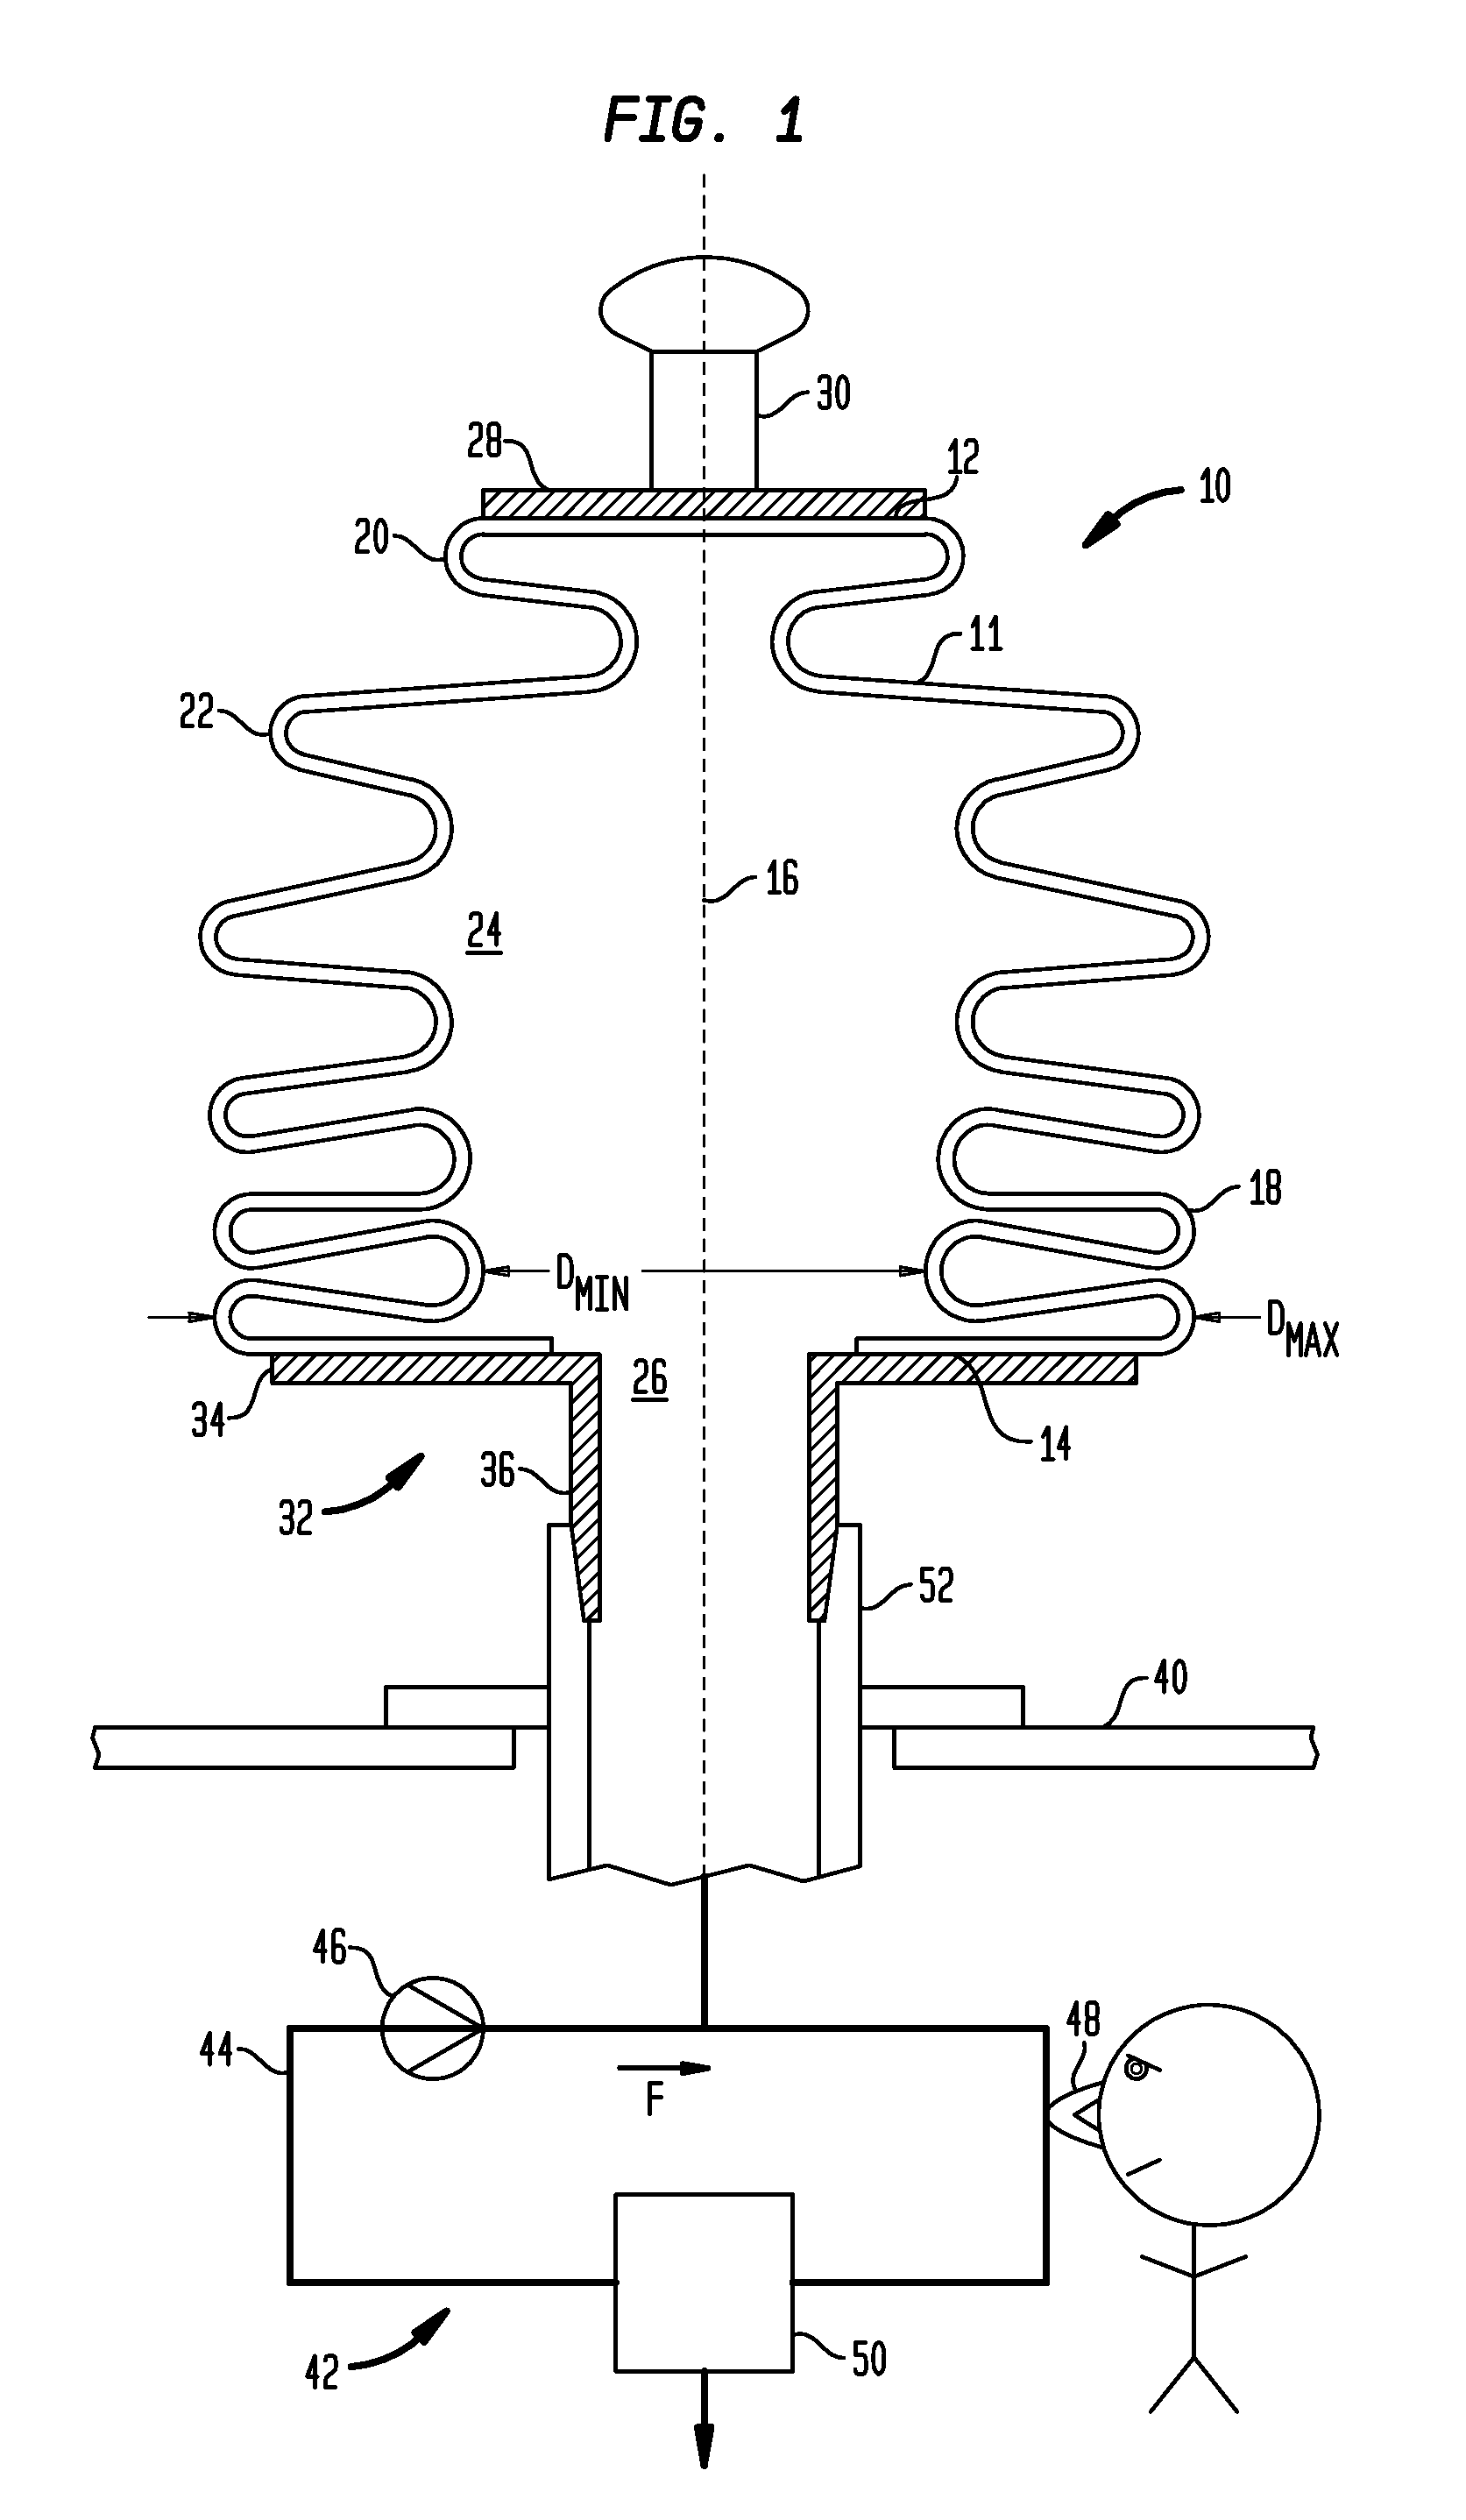 Ventilating element, system, and methods